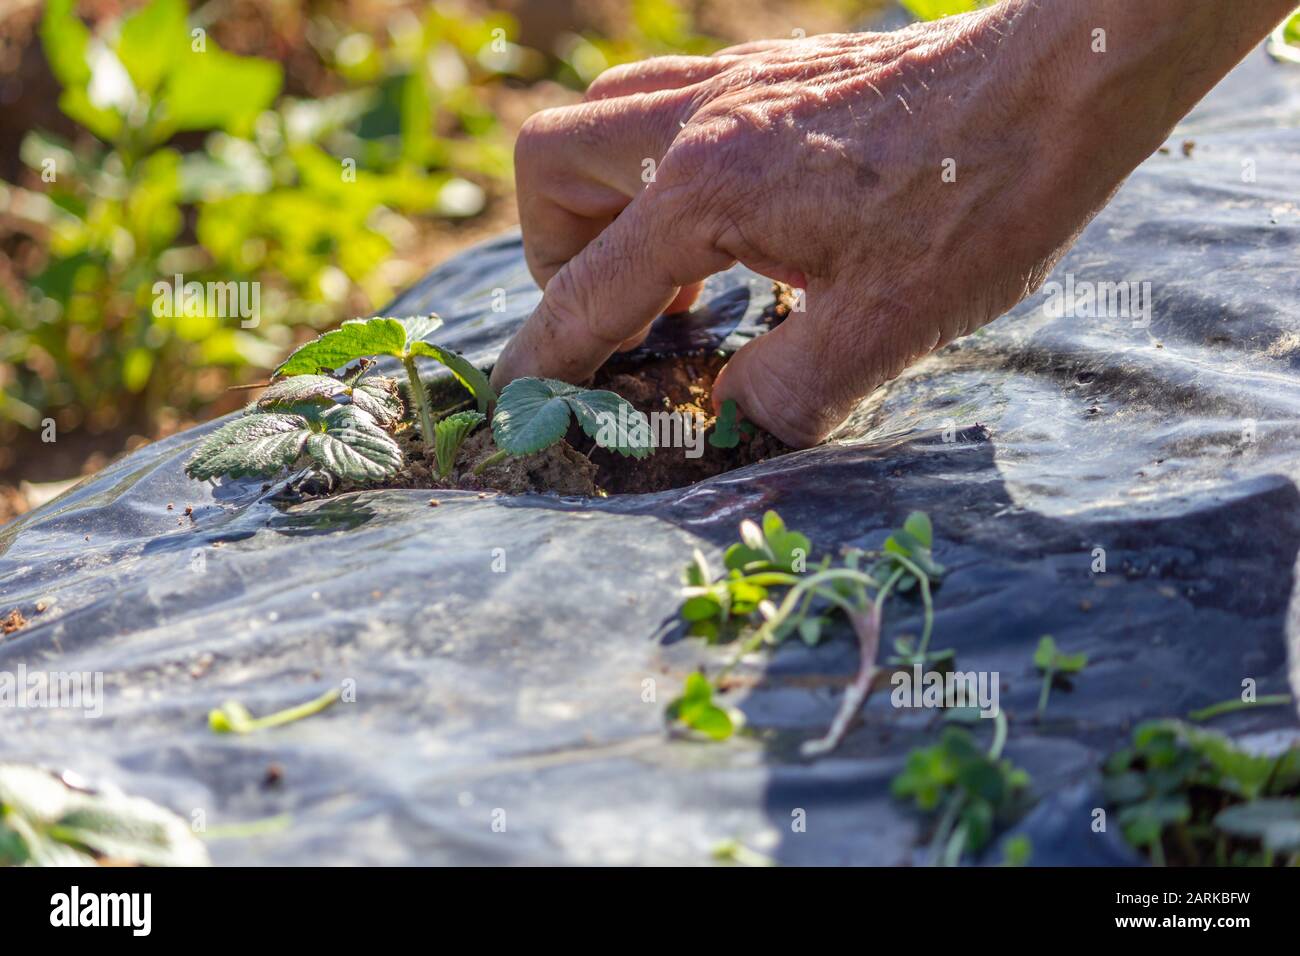 Caring for small strawberry plants in plantation field, removing weeds. Stock Photo